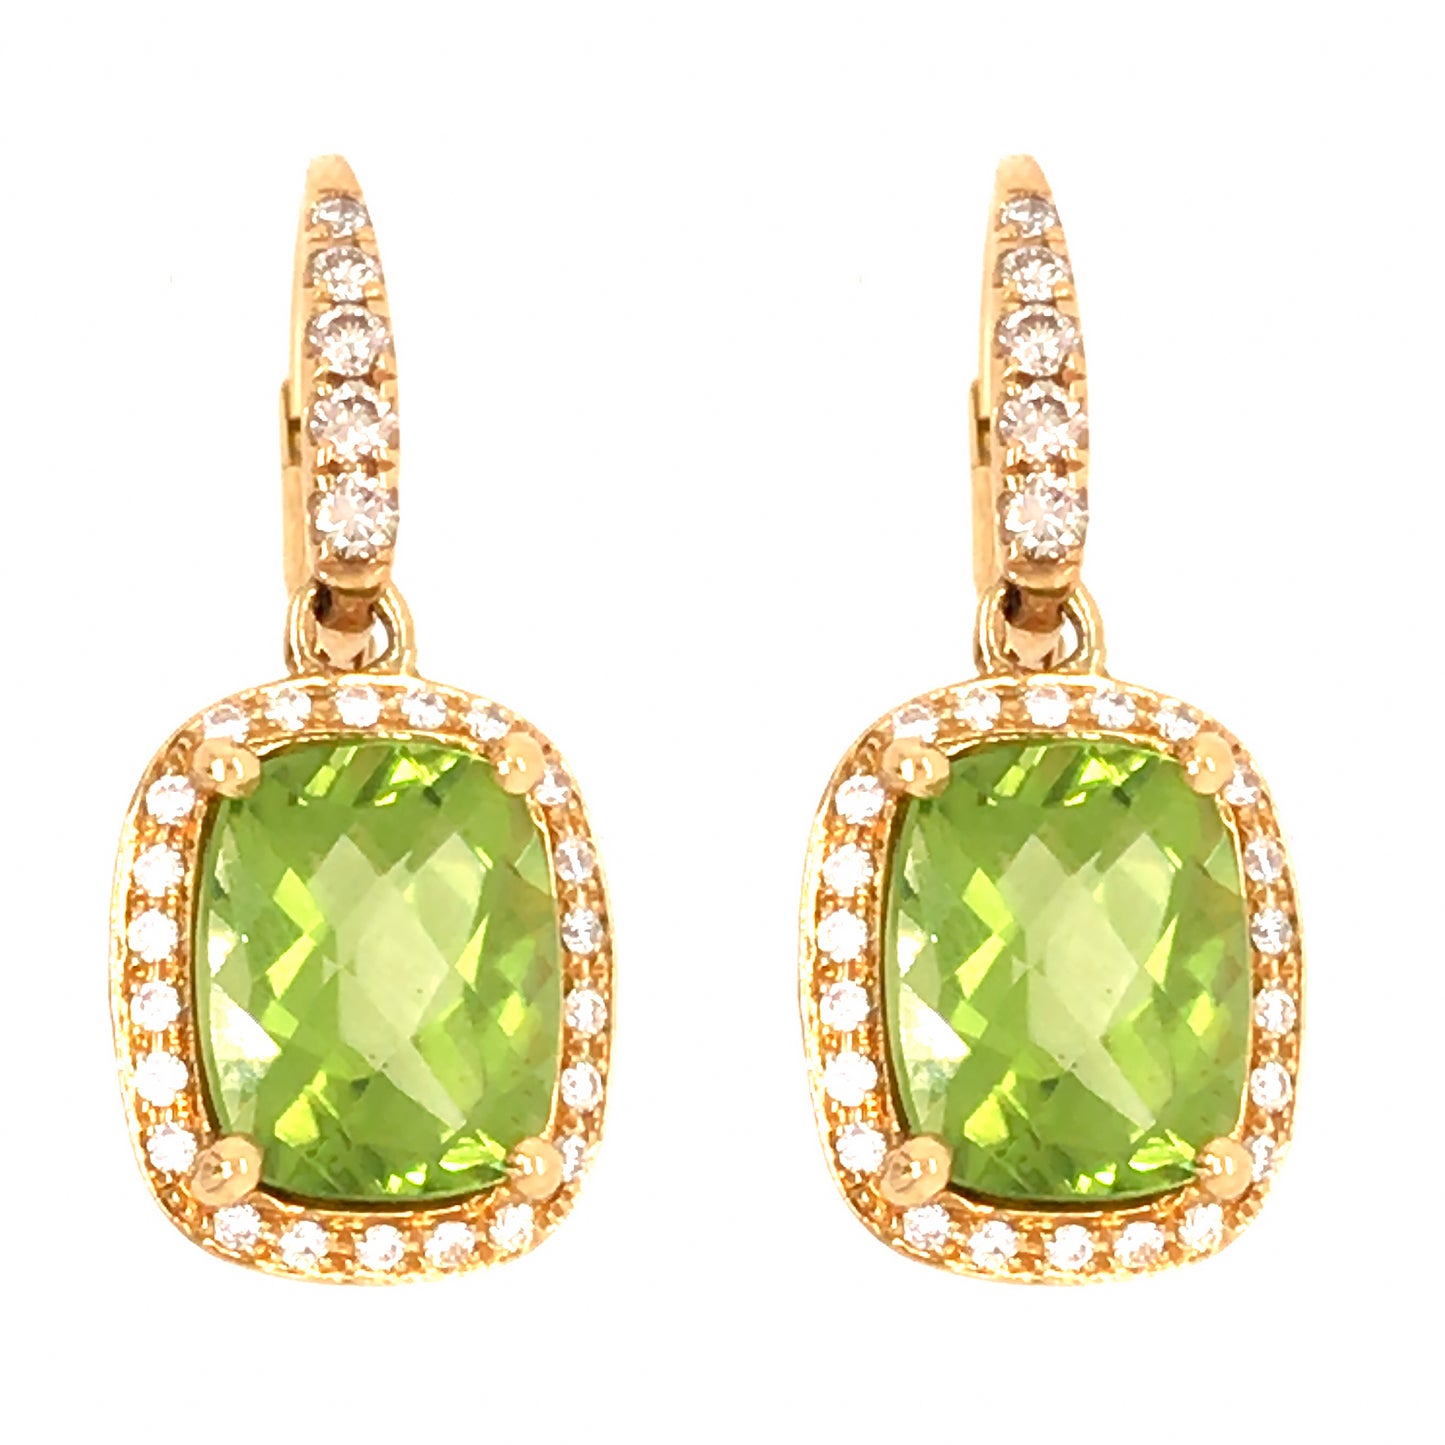 Load image into Gallery viewer, 18k Yellow Gold Diamond and Peridot Drop Earrings
